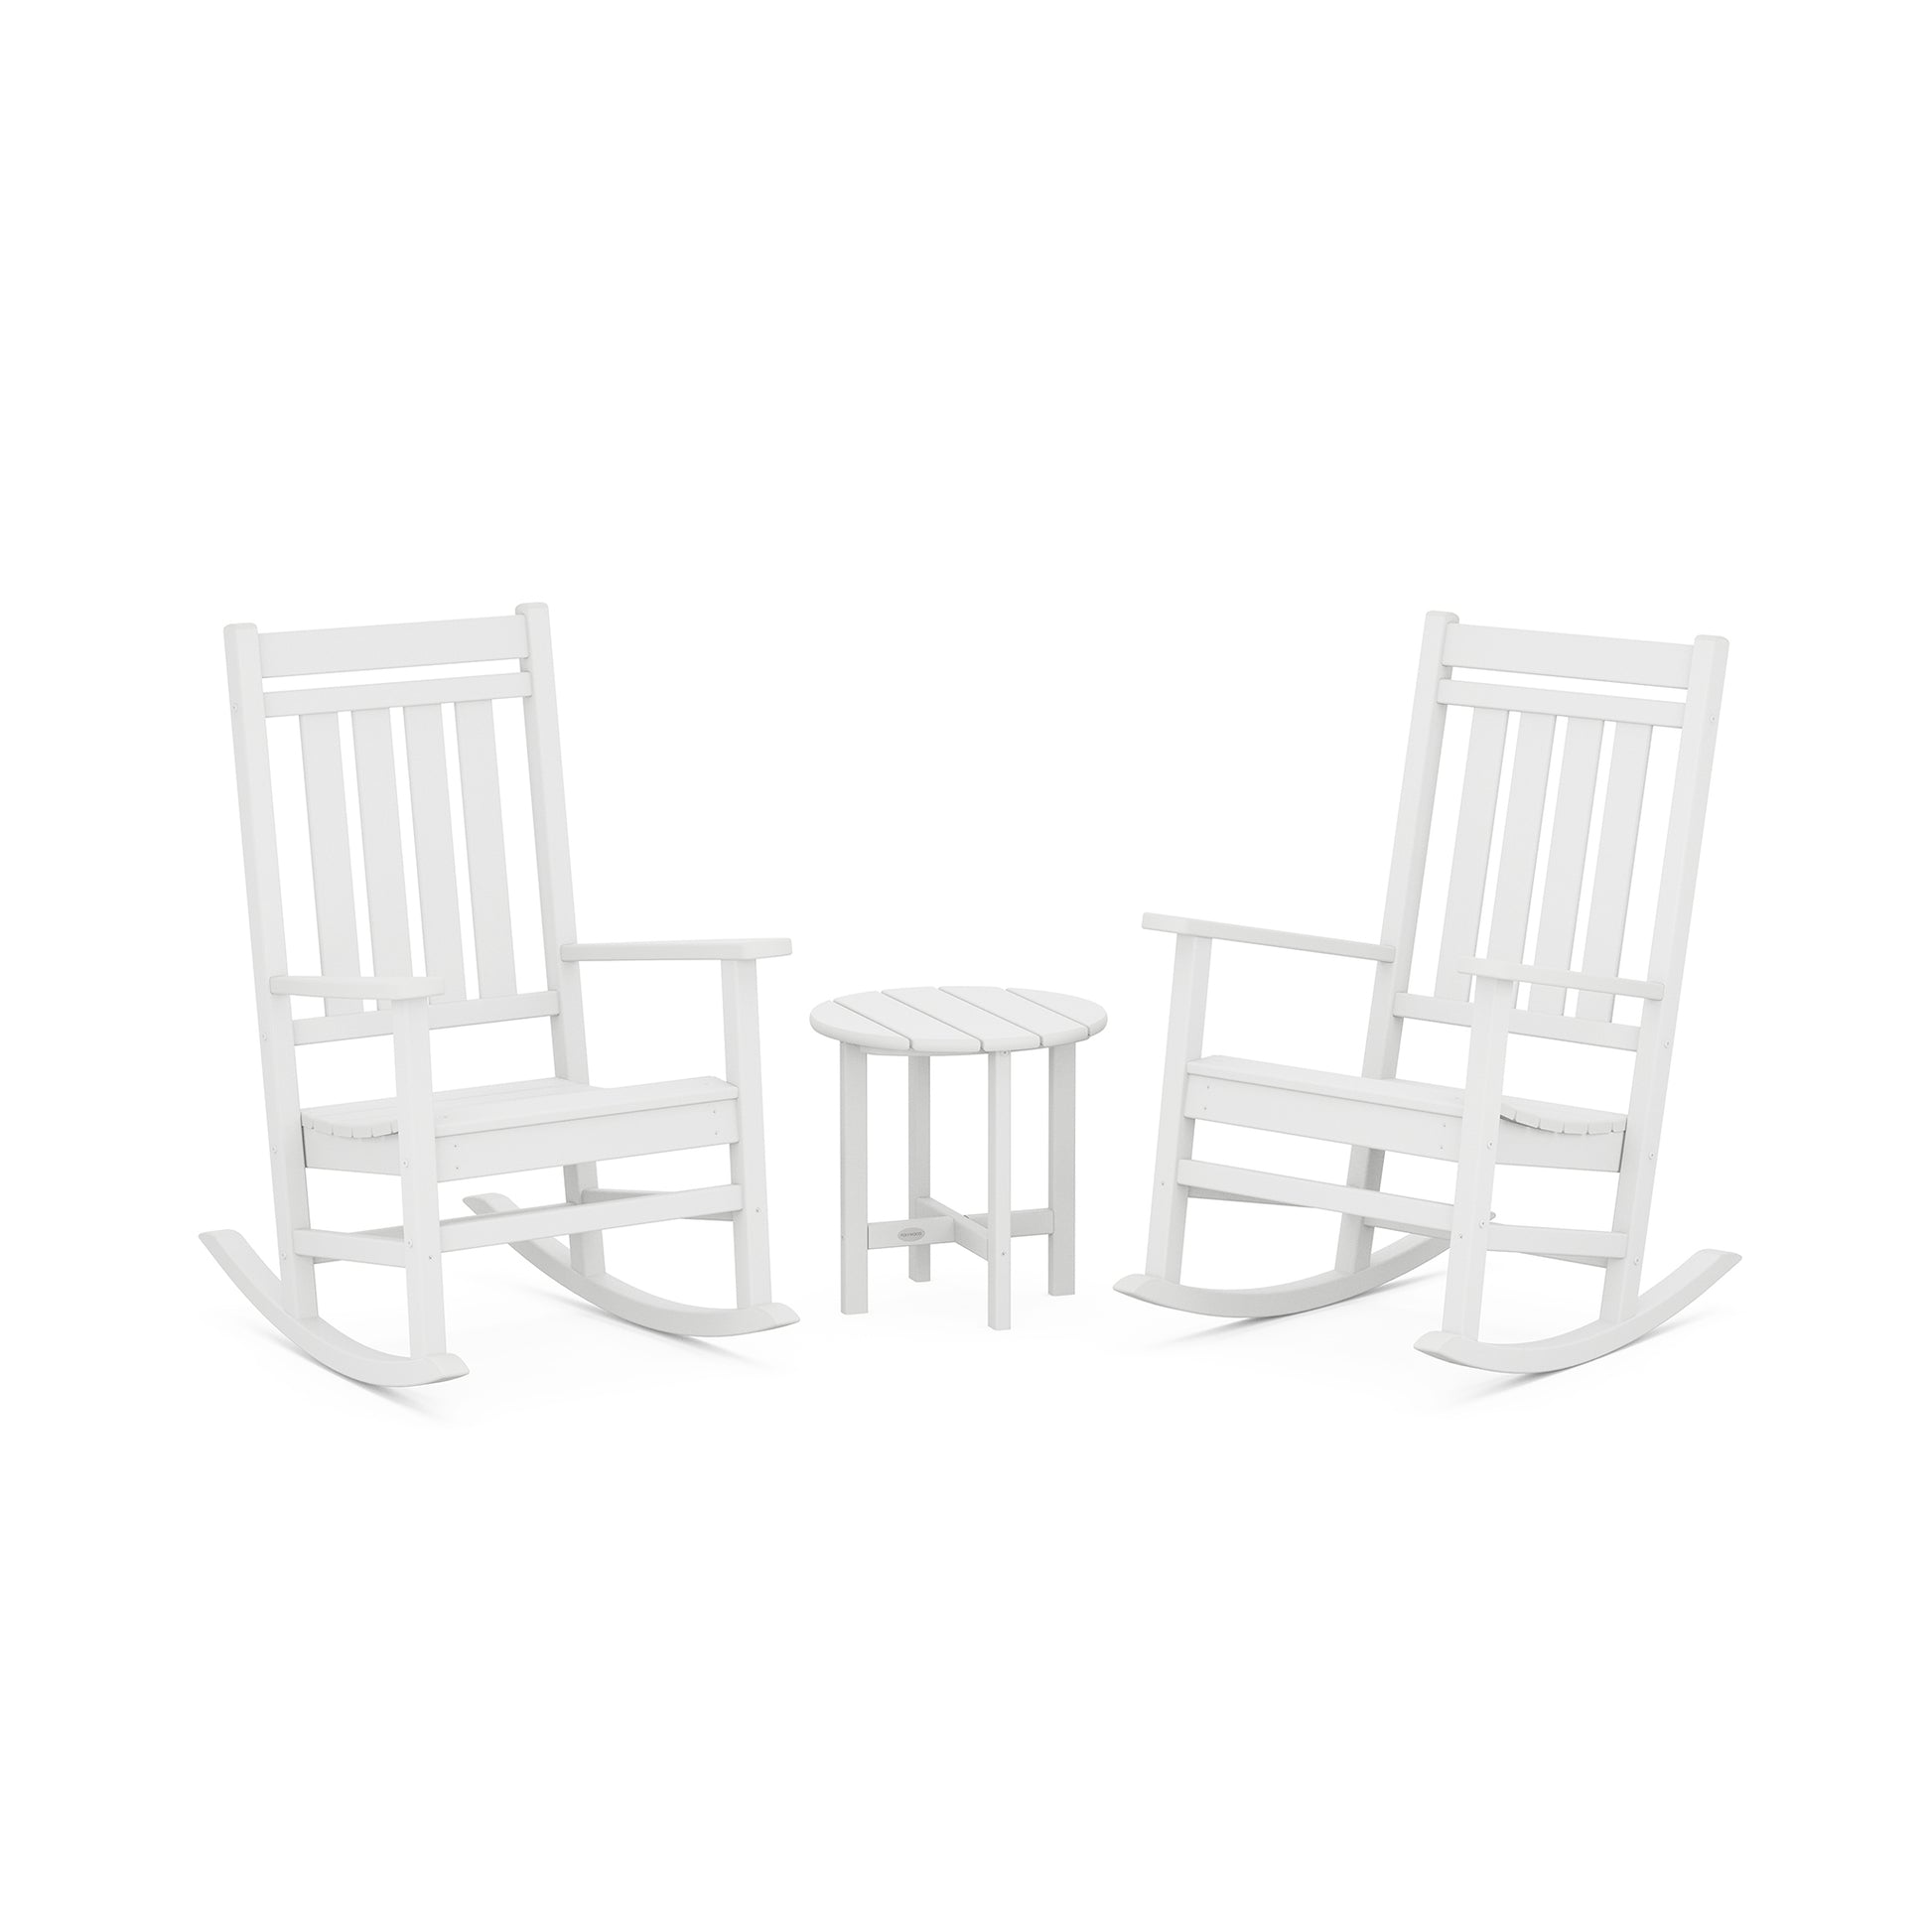 Two white POLYWOOD® Estate 3-Piece Rocking Chair Sets facing each other with a small round table in between, isolated on a white background.